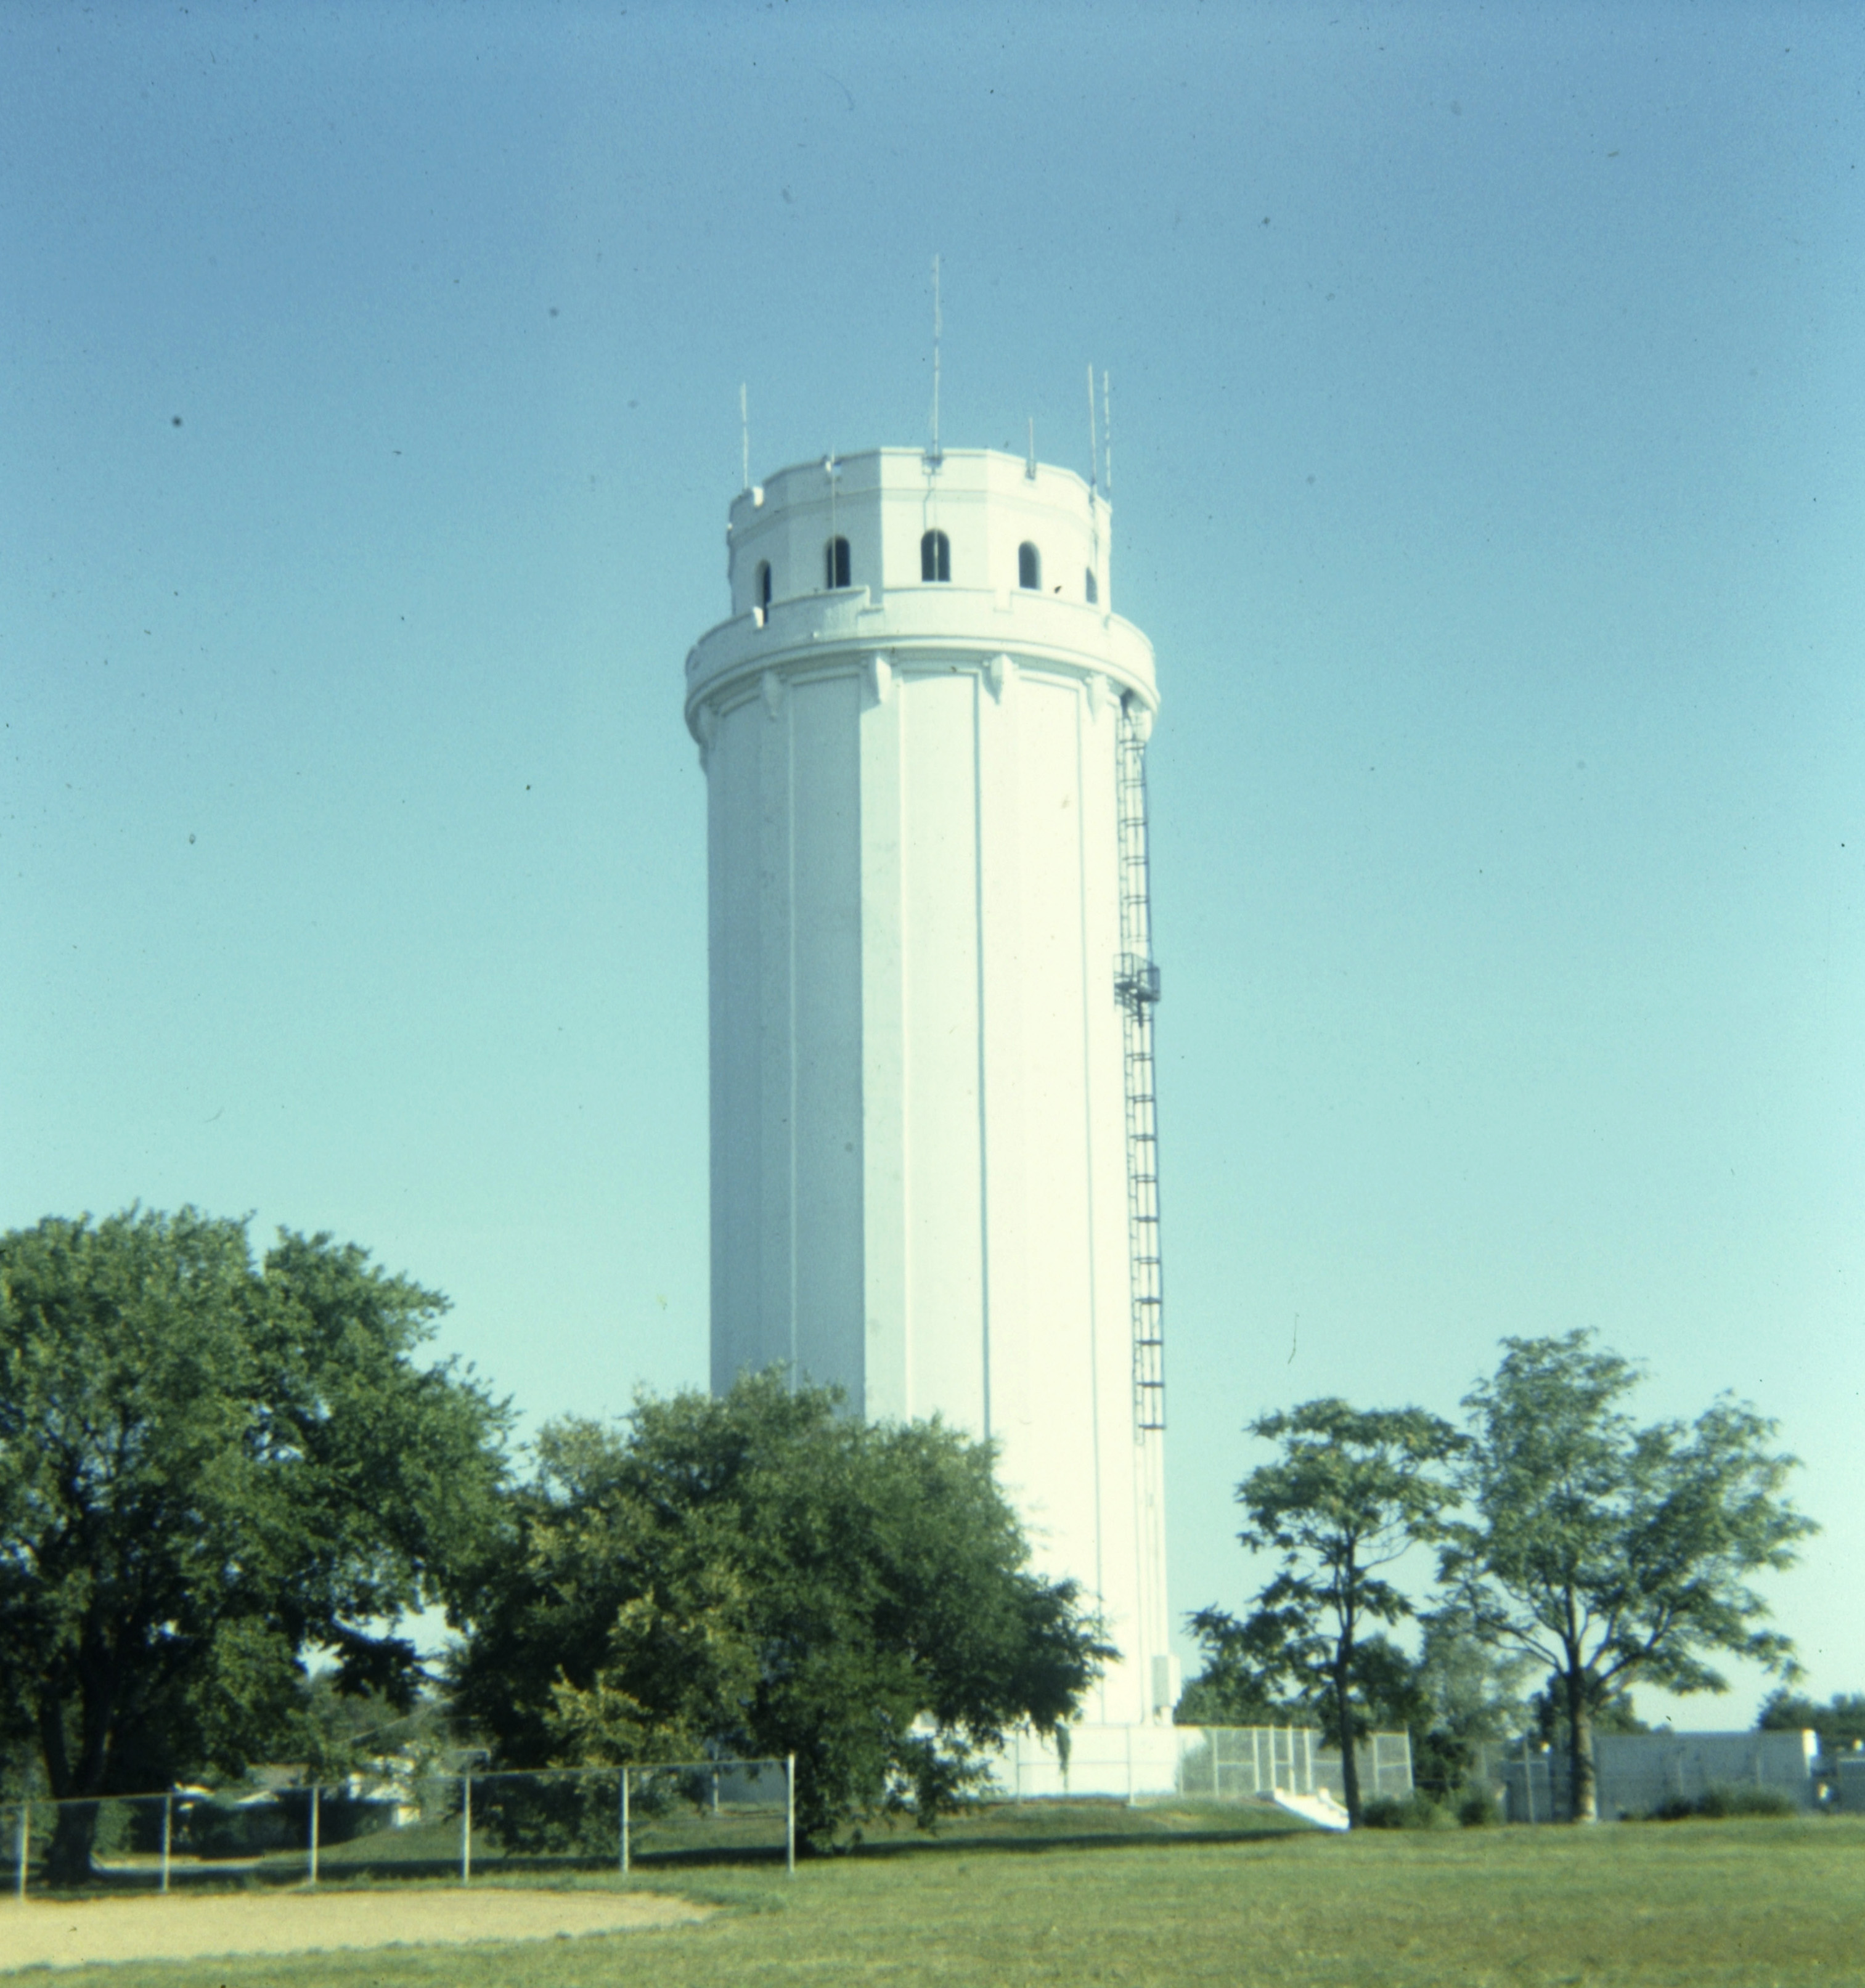 The Frank T. Riley Memorial, commonly known as the Waldo water tower.